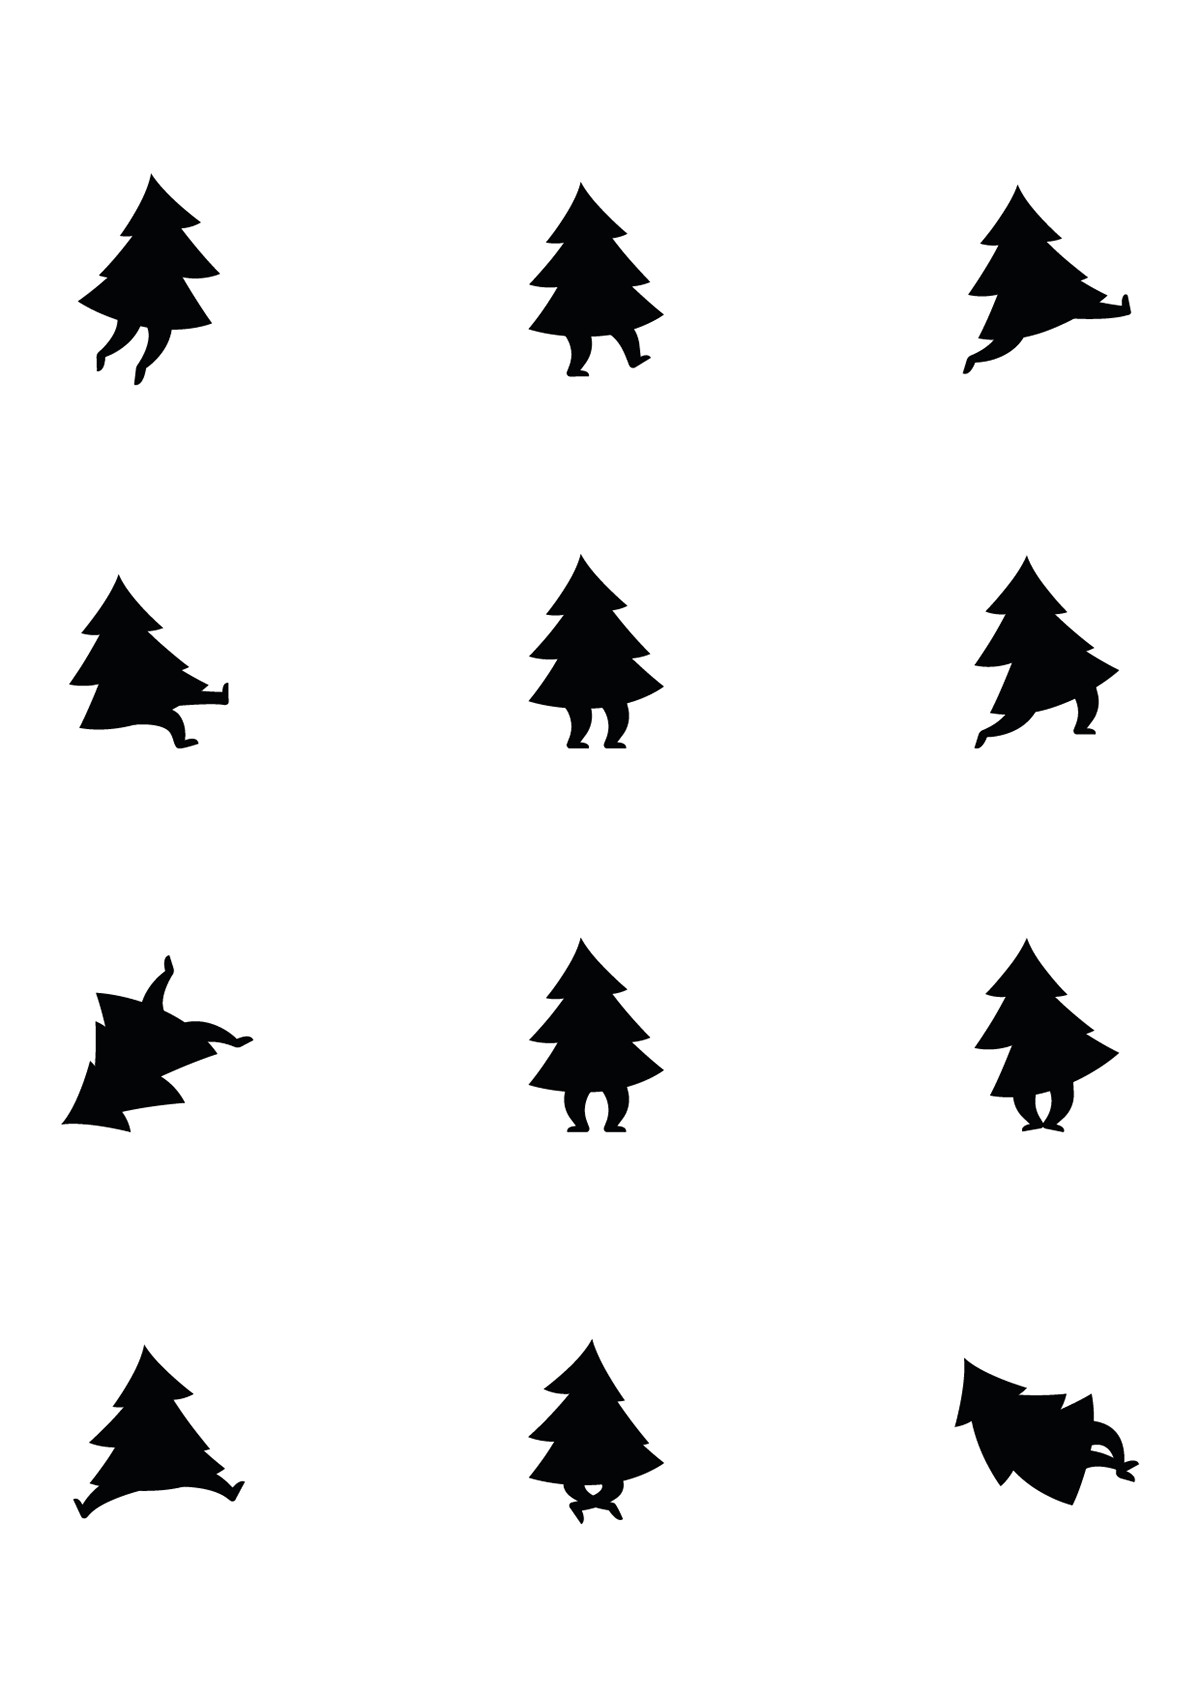 black and white branding  Character forest gallery logo pattern print Stationery Tree 